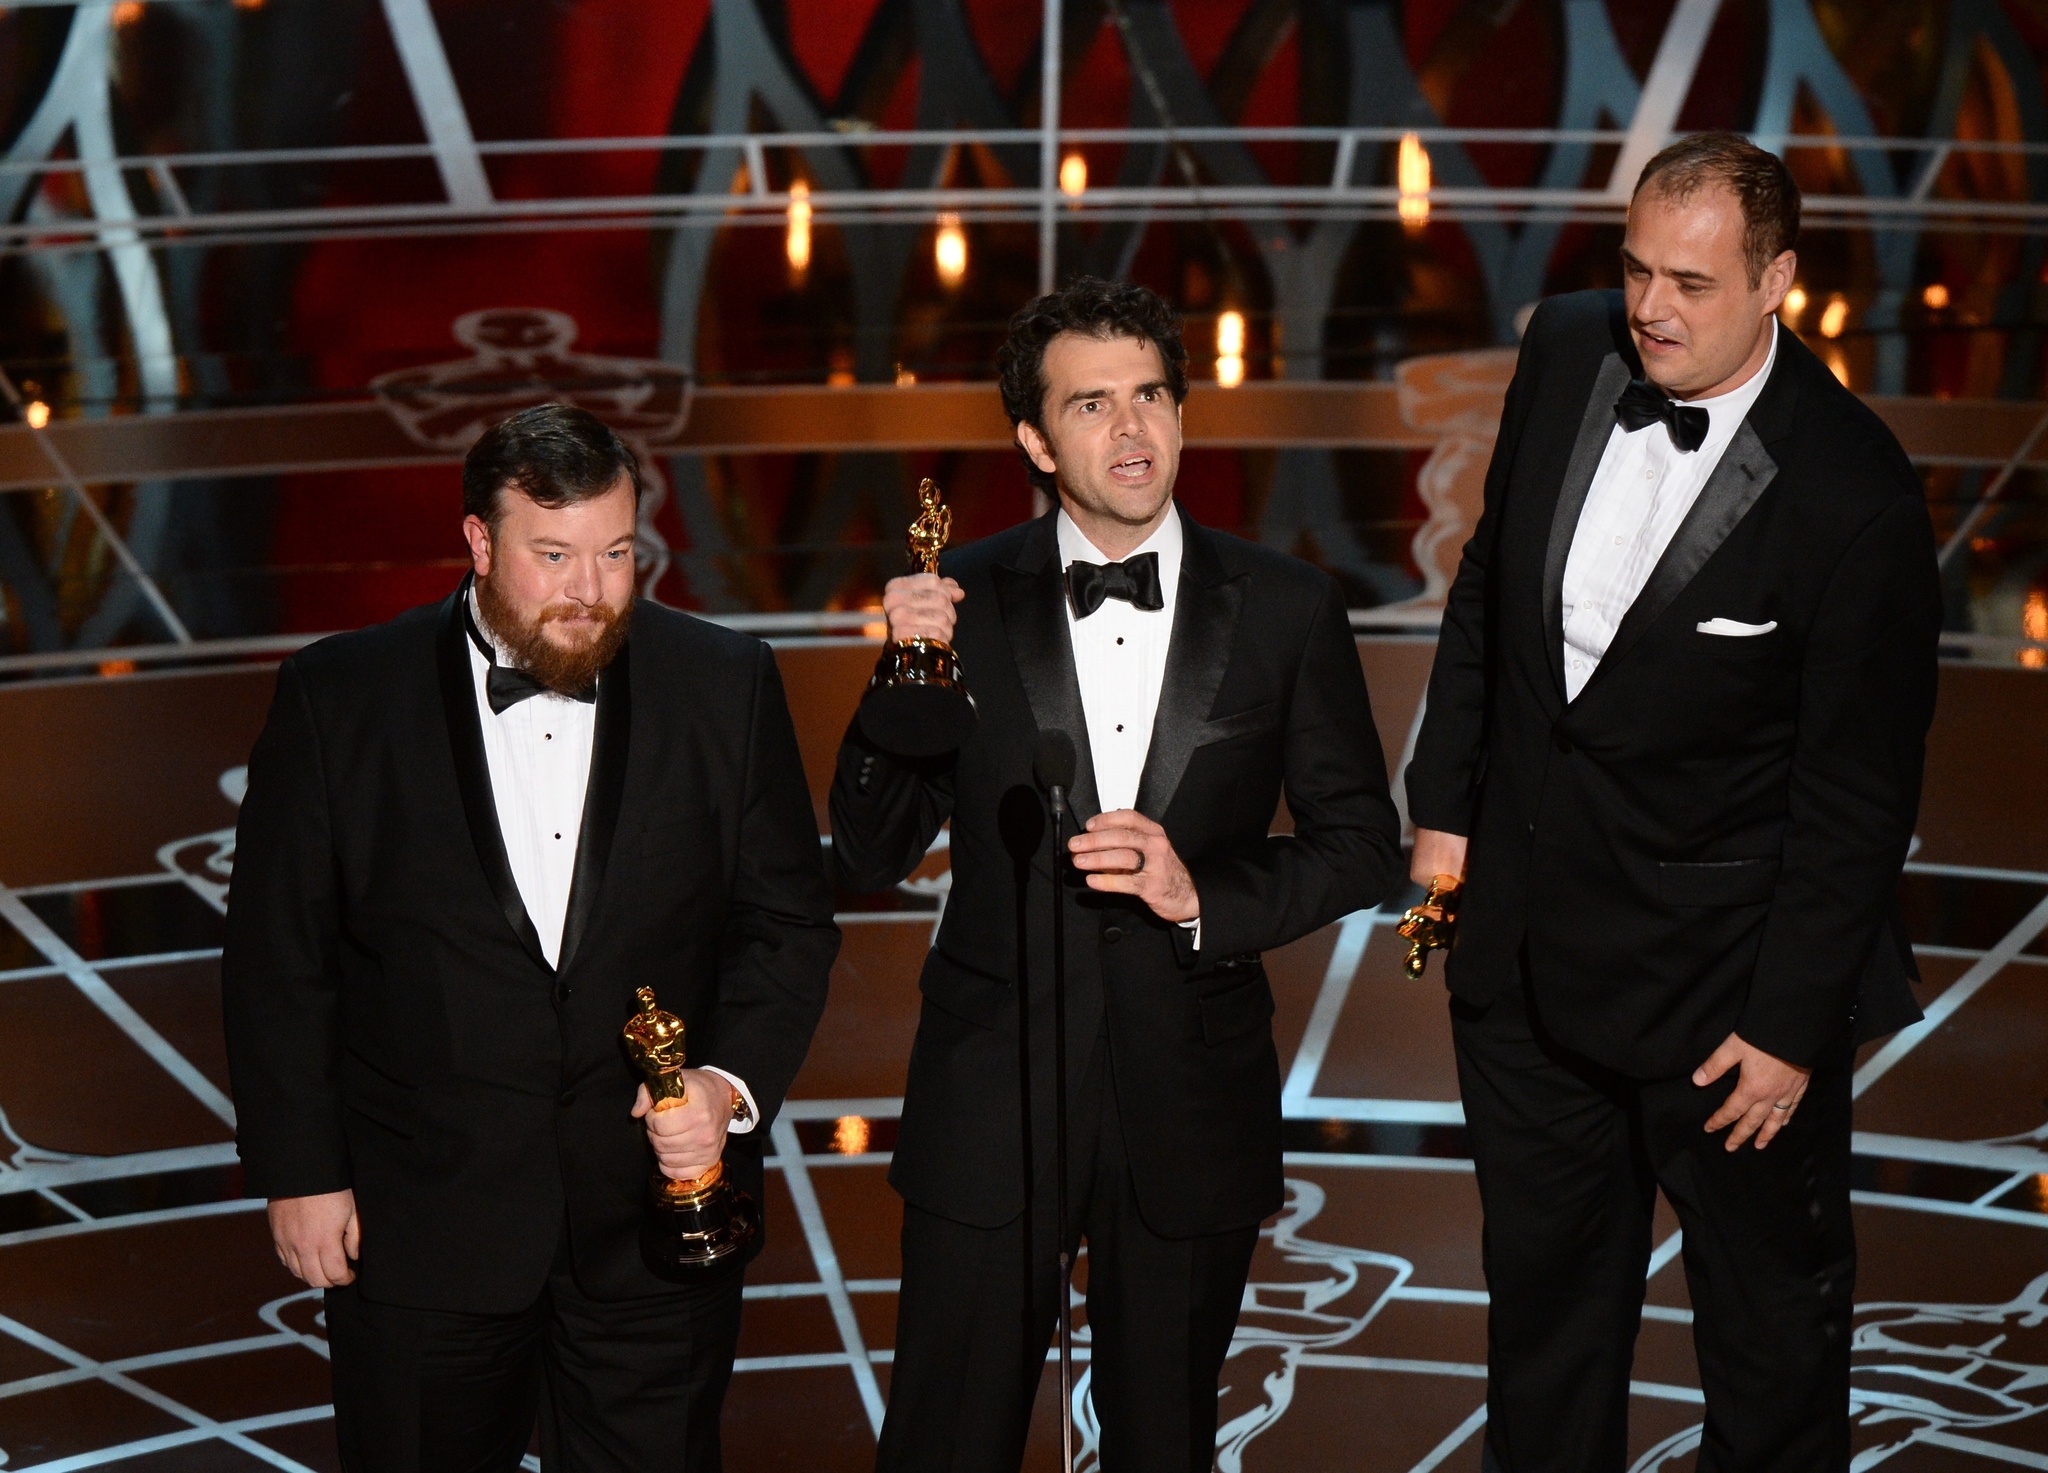 Ben Wilkins, Craig Mann and Thomas Curley at event of The Oscars (2015)